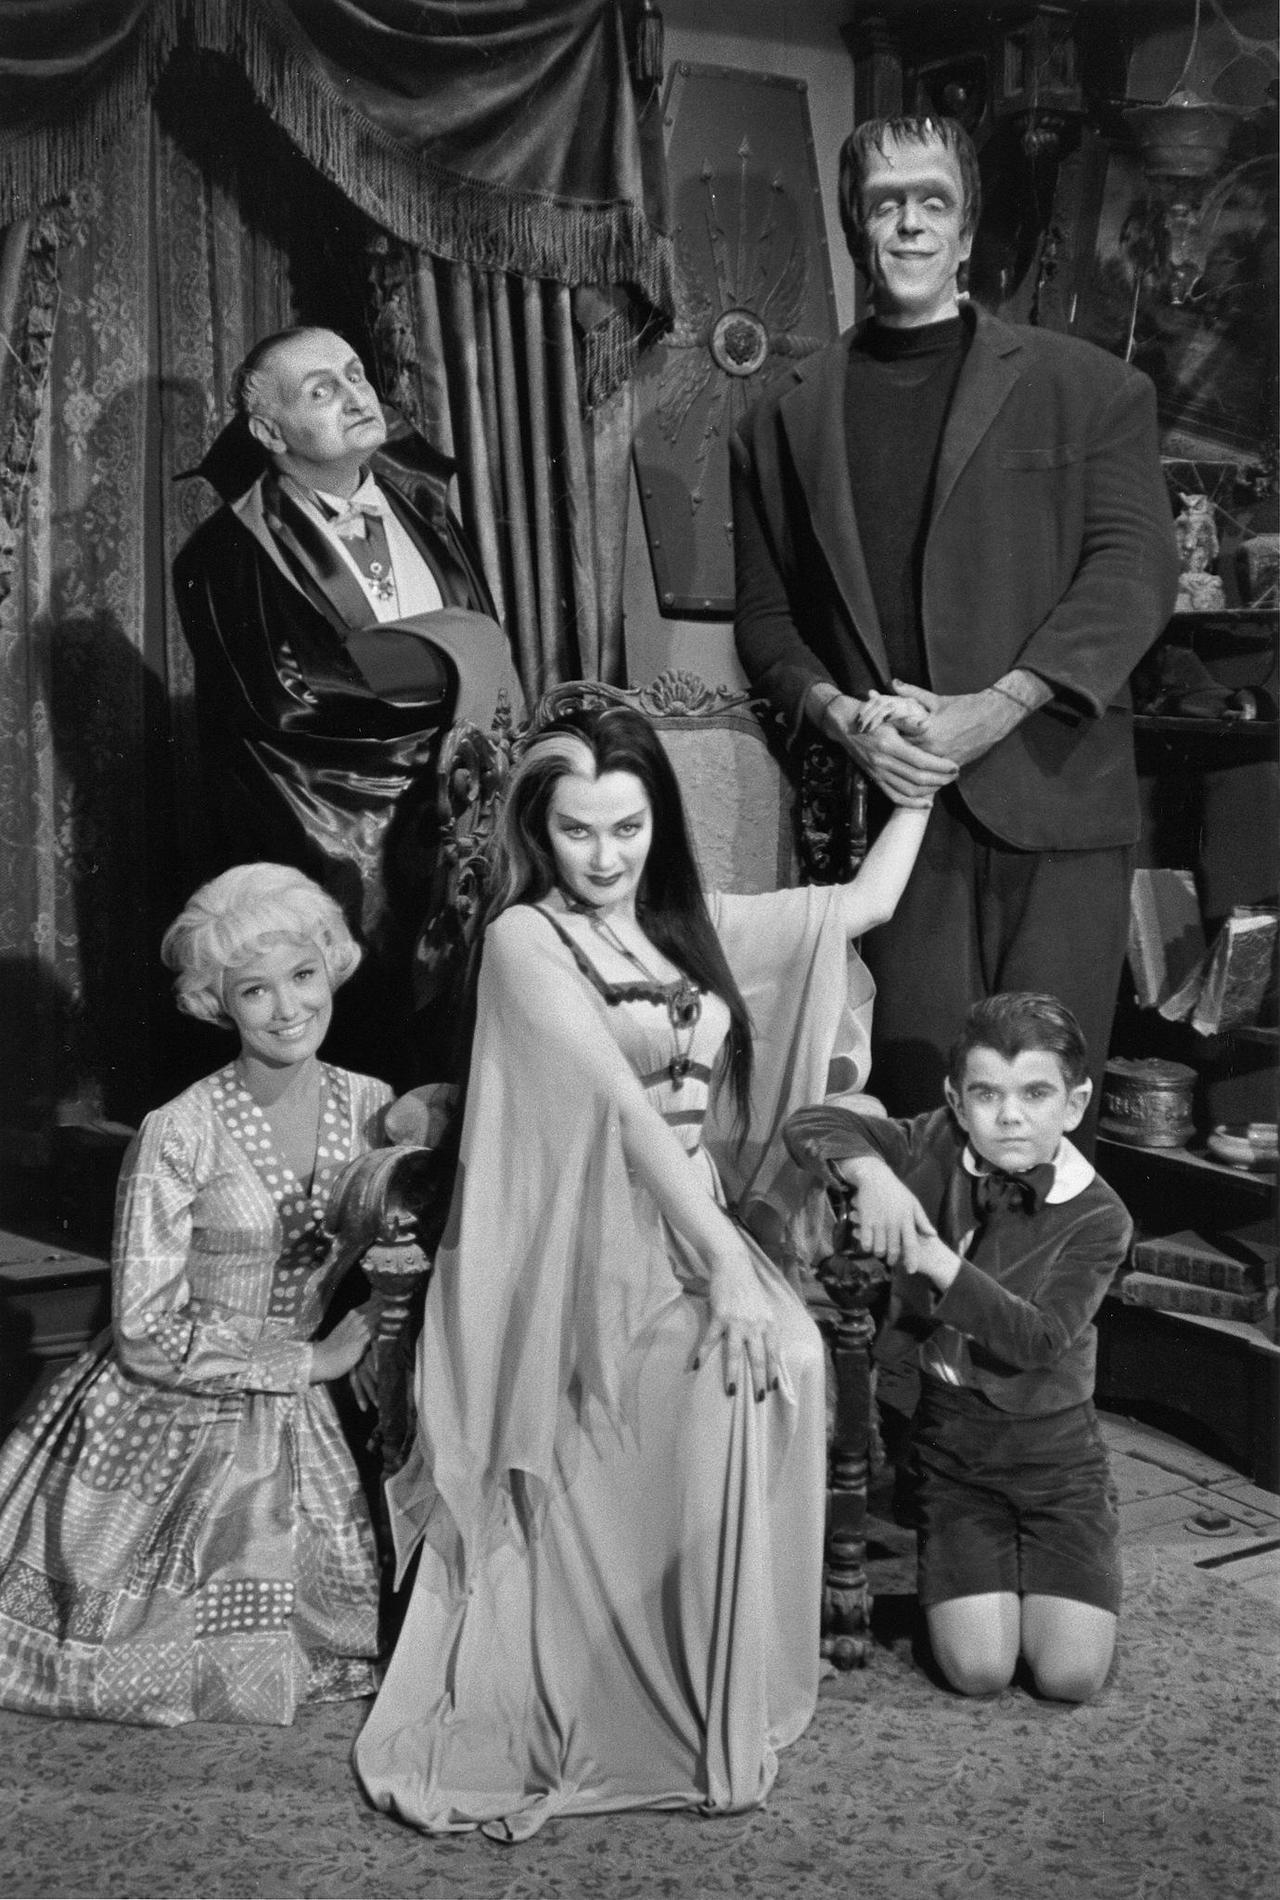 HQ The Munsters Wallpapers | File 336.71Kb